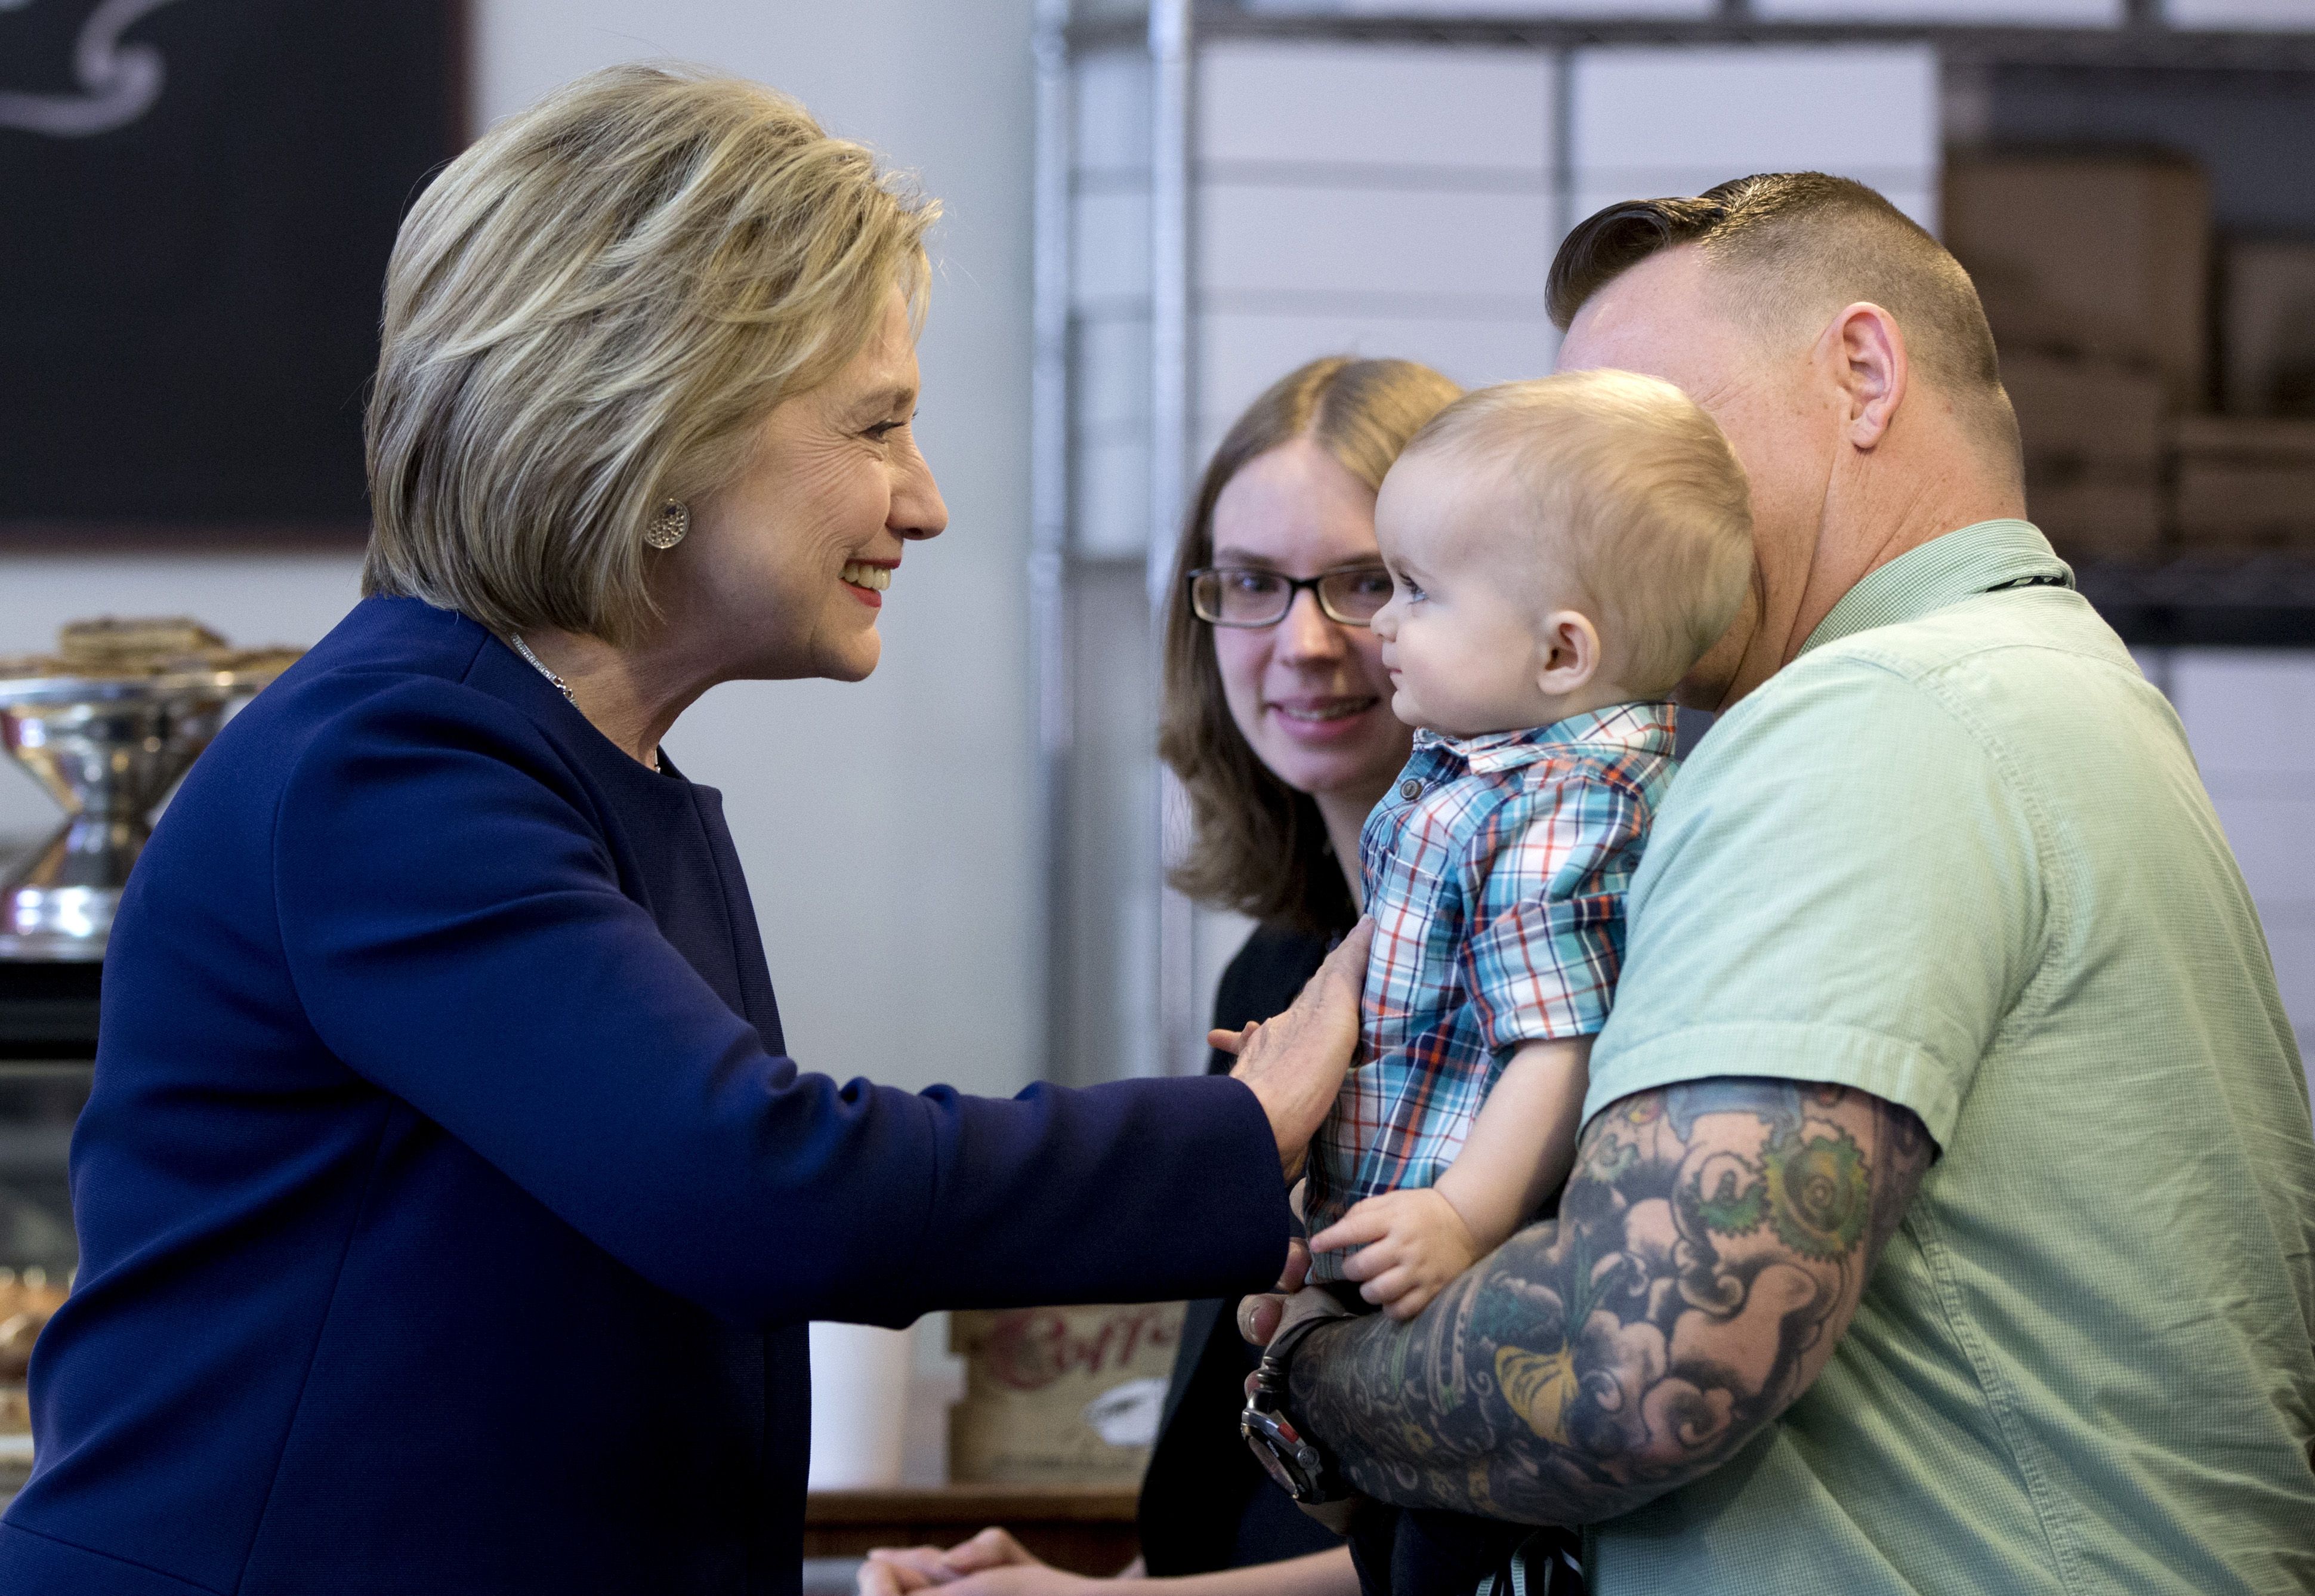 Hillary Clinton greets a young supporter.